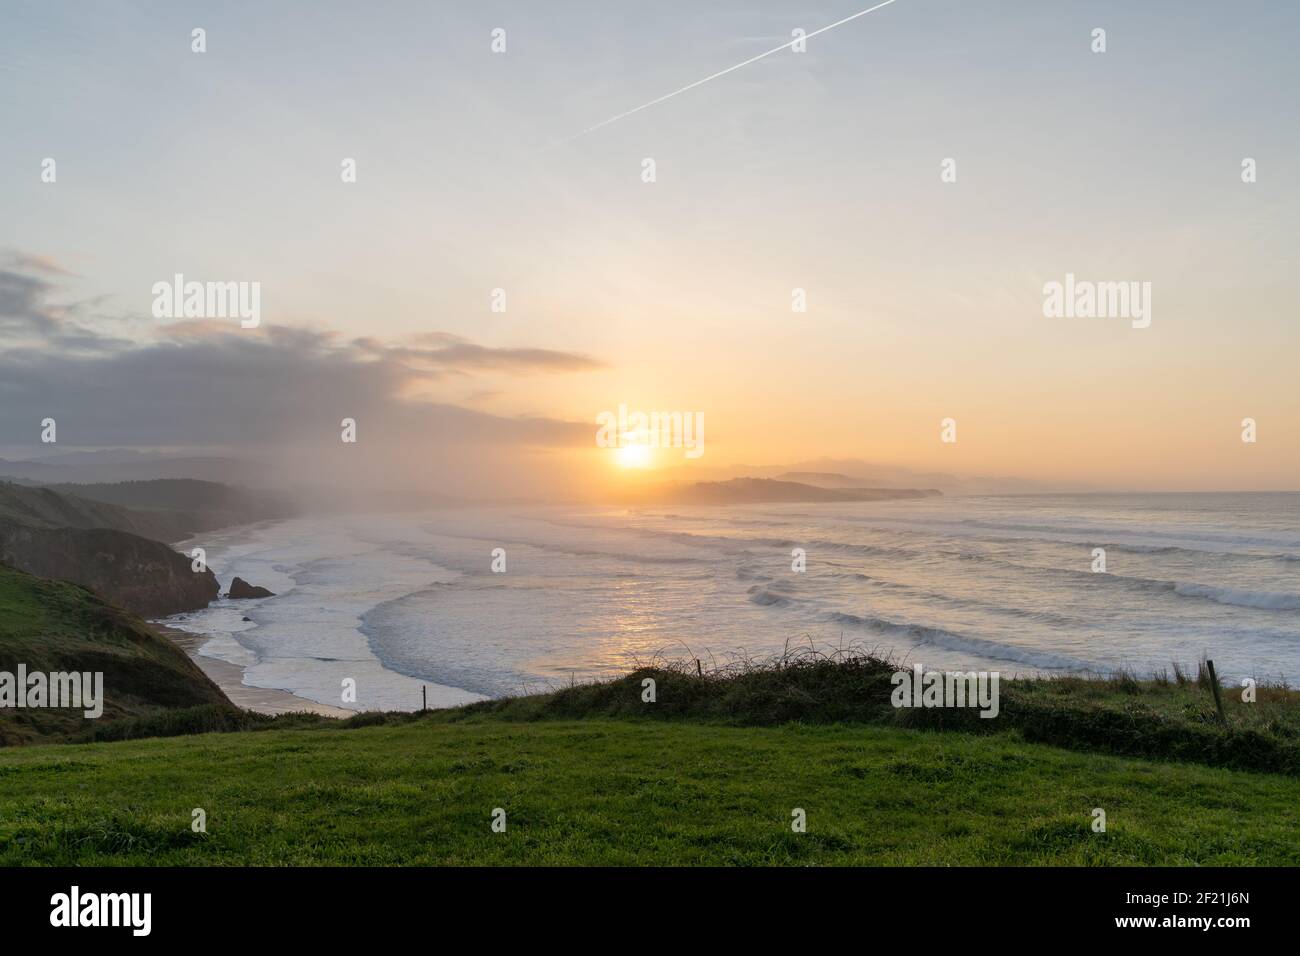 Tall green grassy cliffs drop down to the ocean coast in northern Spain at sunset Stock Photo